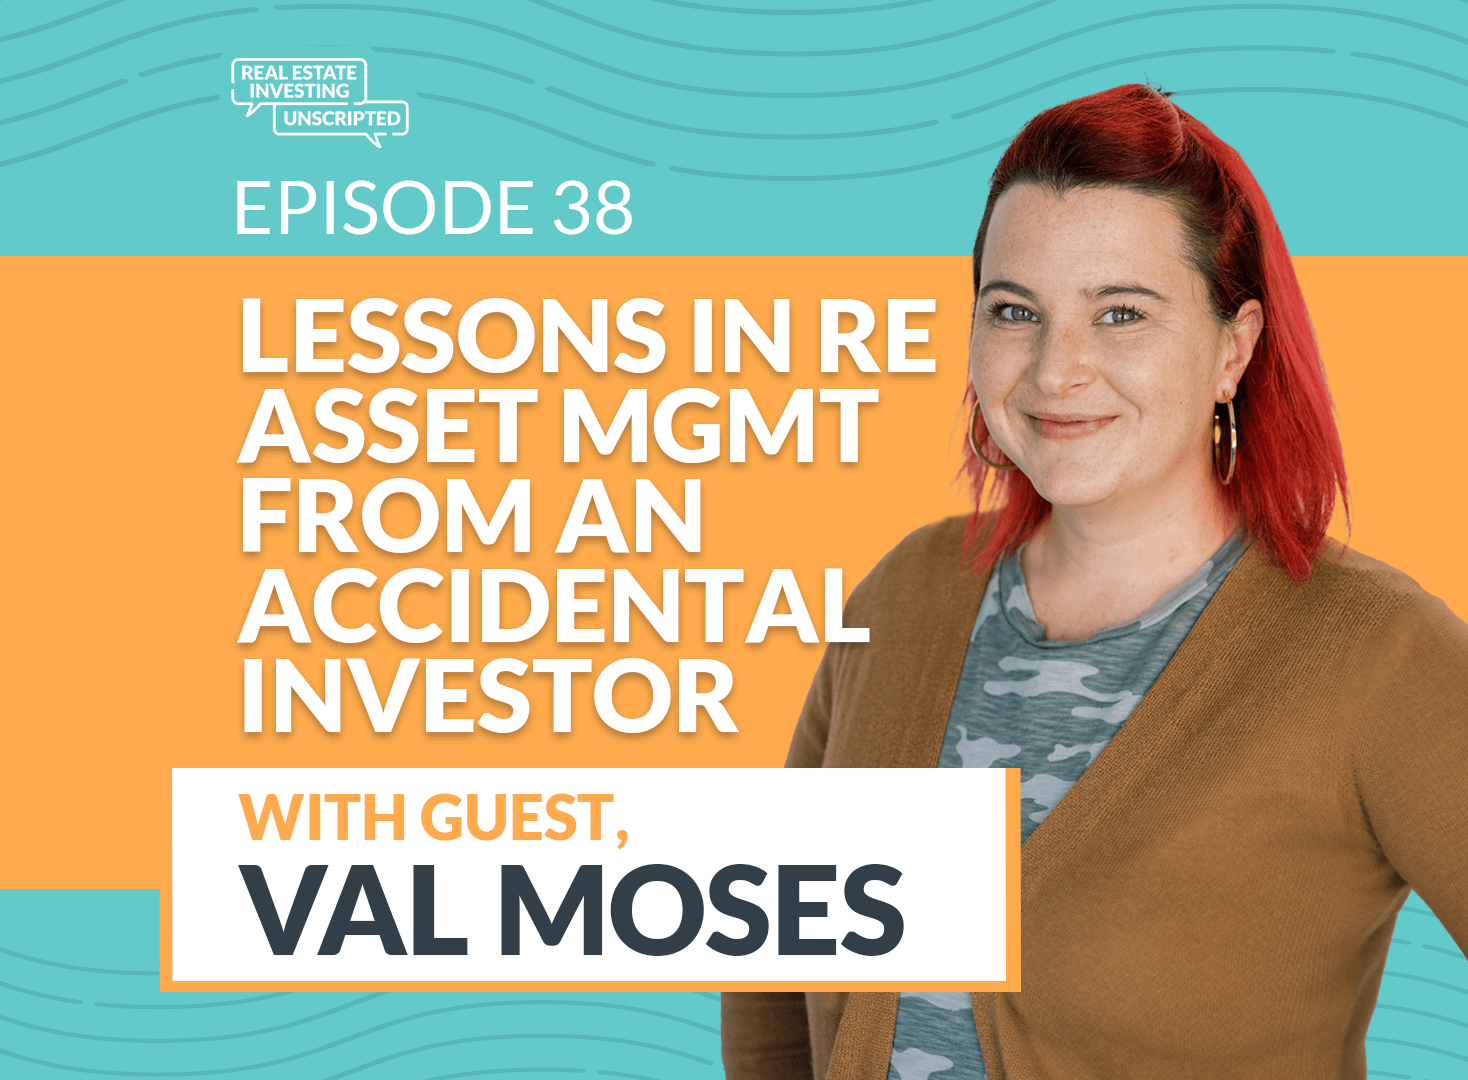 On this week's episode of Real Estate Investing Unscripted, We caught up with Brendan, David, and VP of Asset Management, Val Moses